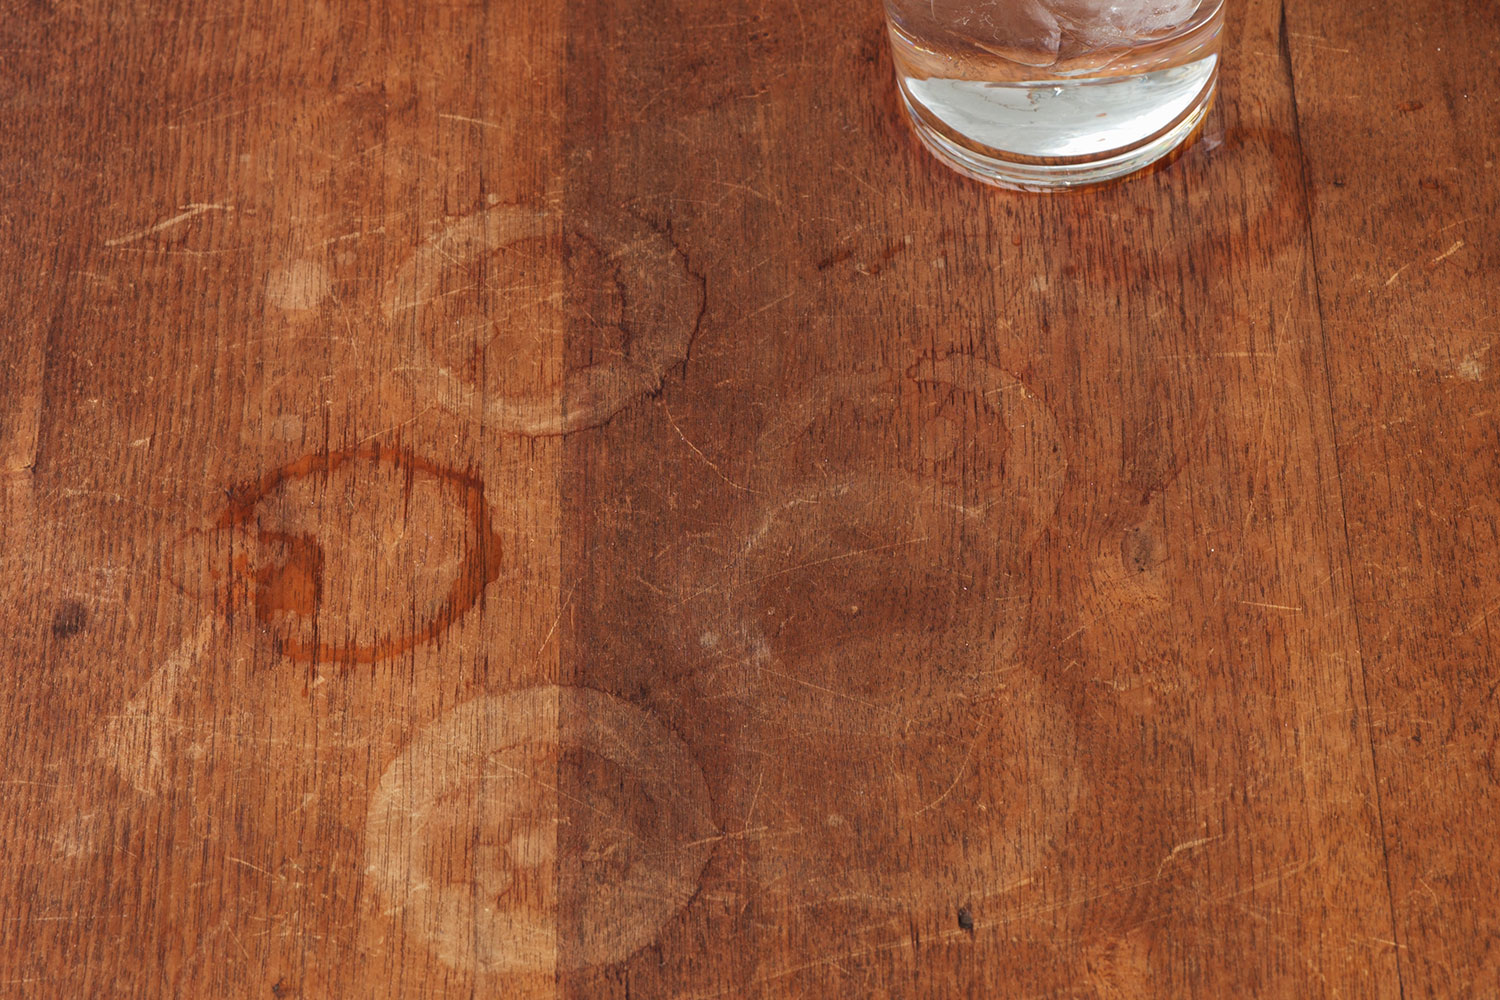 How To Remove Water Stains From Wood, How To Remove Dark Water Stains From Laminate Flooring